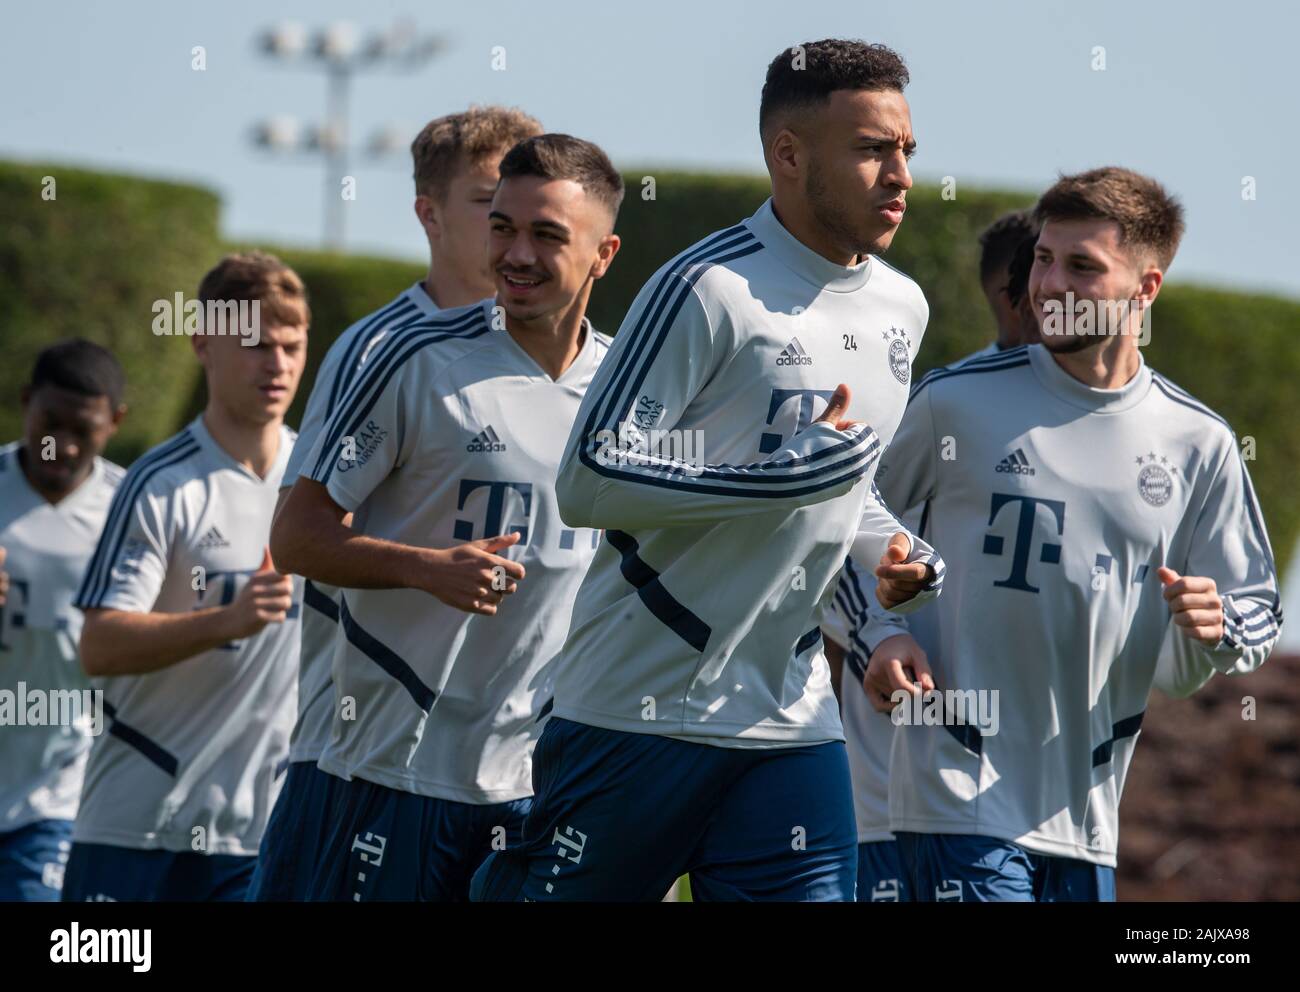 Doha Qatar 06th Jan 2020 Football Bundesliga Training Camp Fc Bayern Munich The Fc Bayern Munich Team Including Corentin Tolisso 2nd From Right Trains During A Practice Session In The Morning On